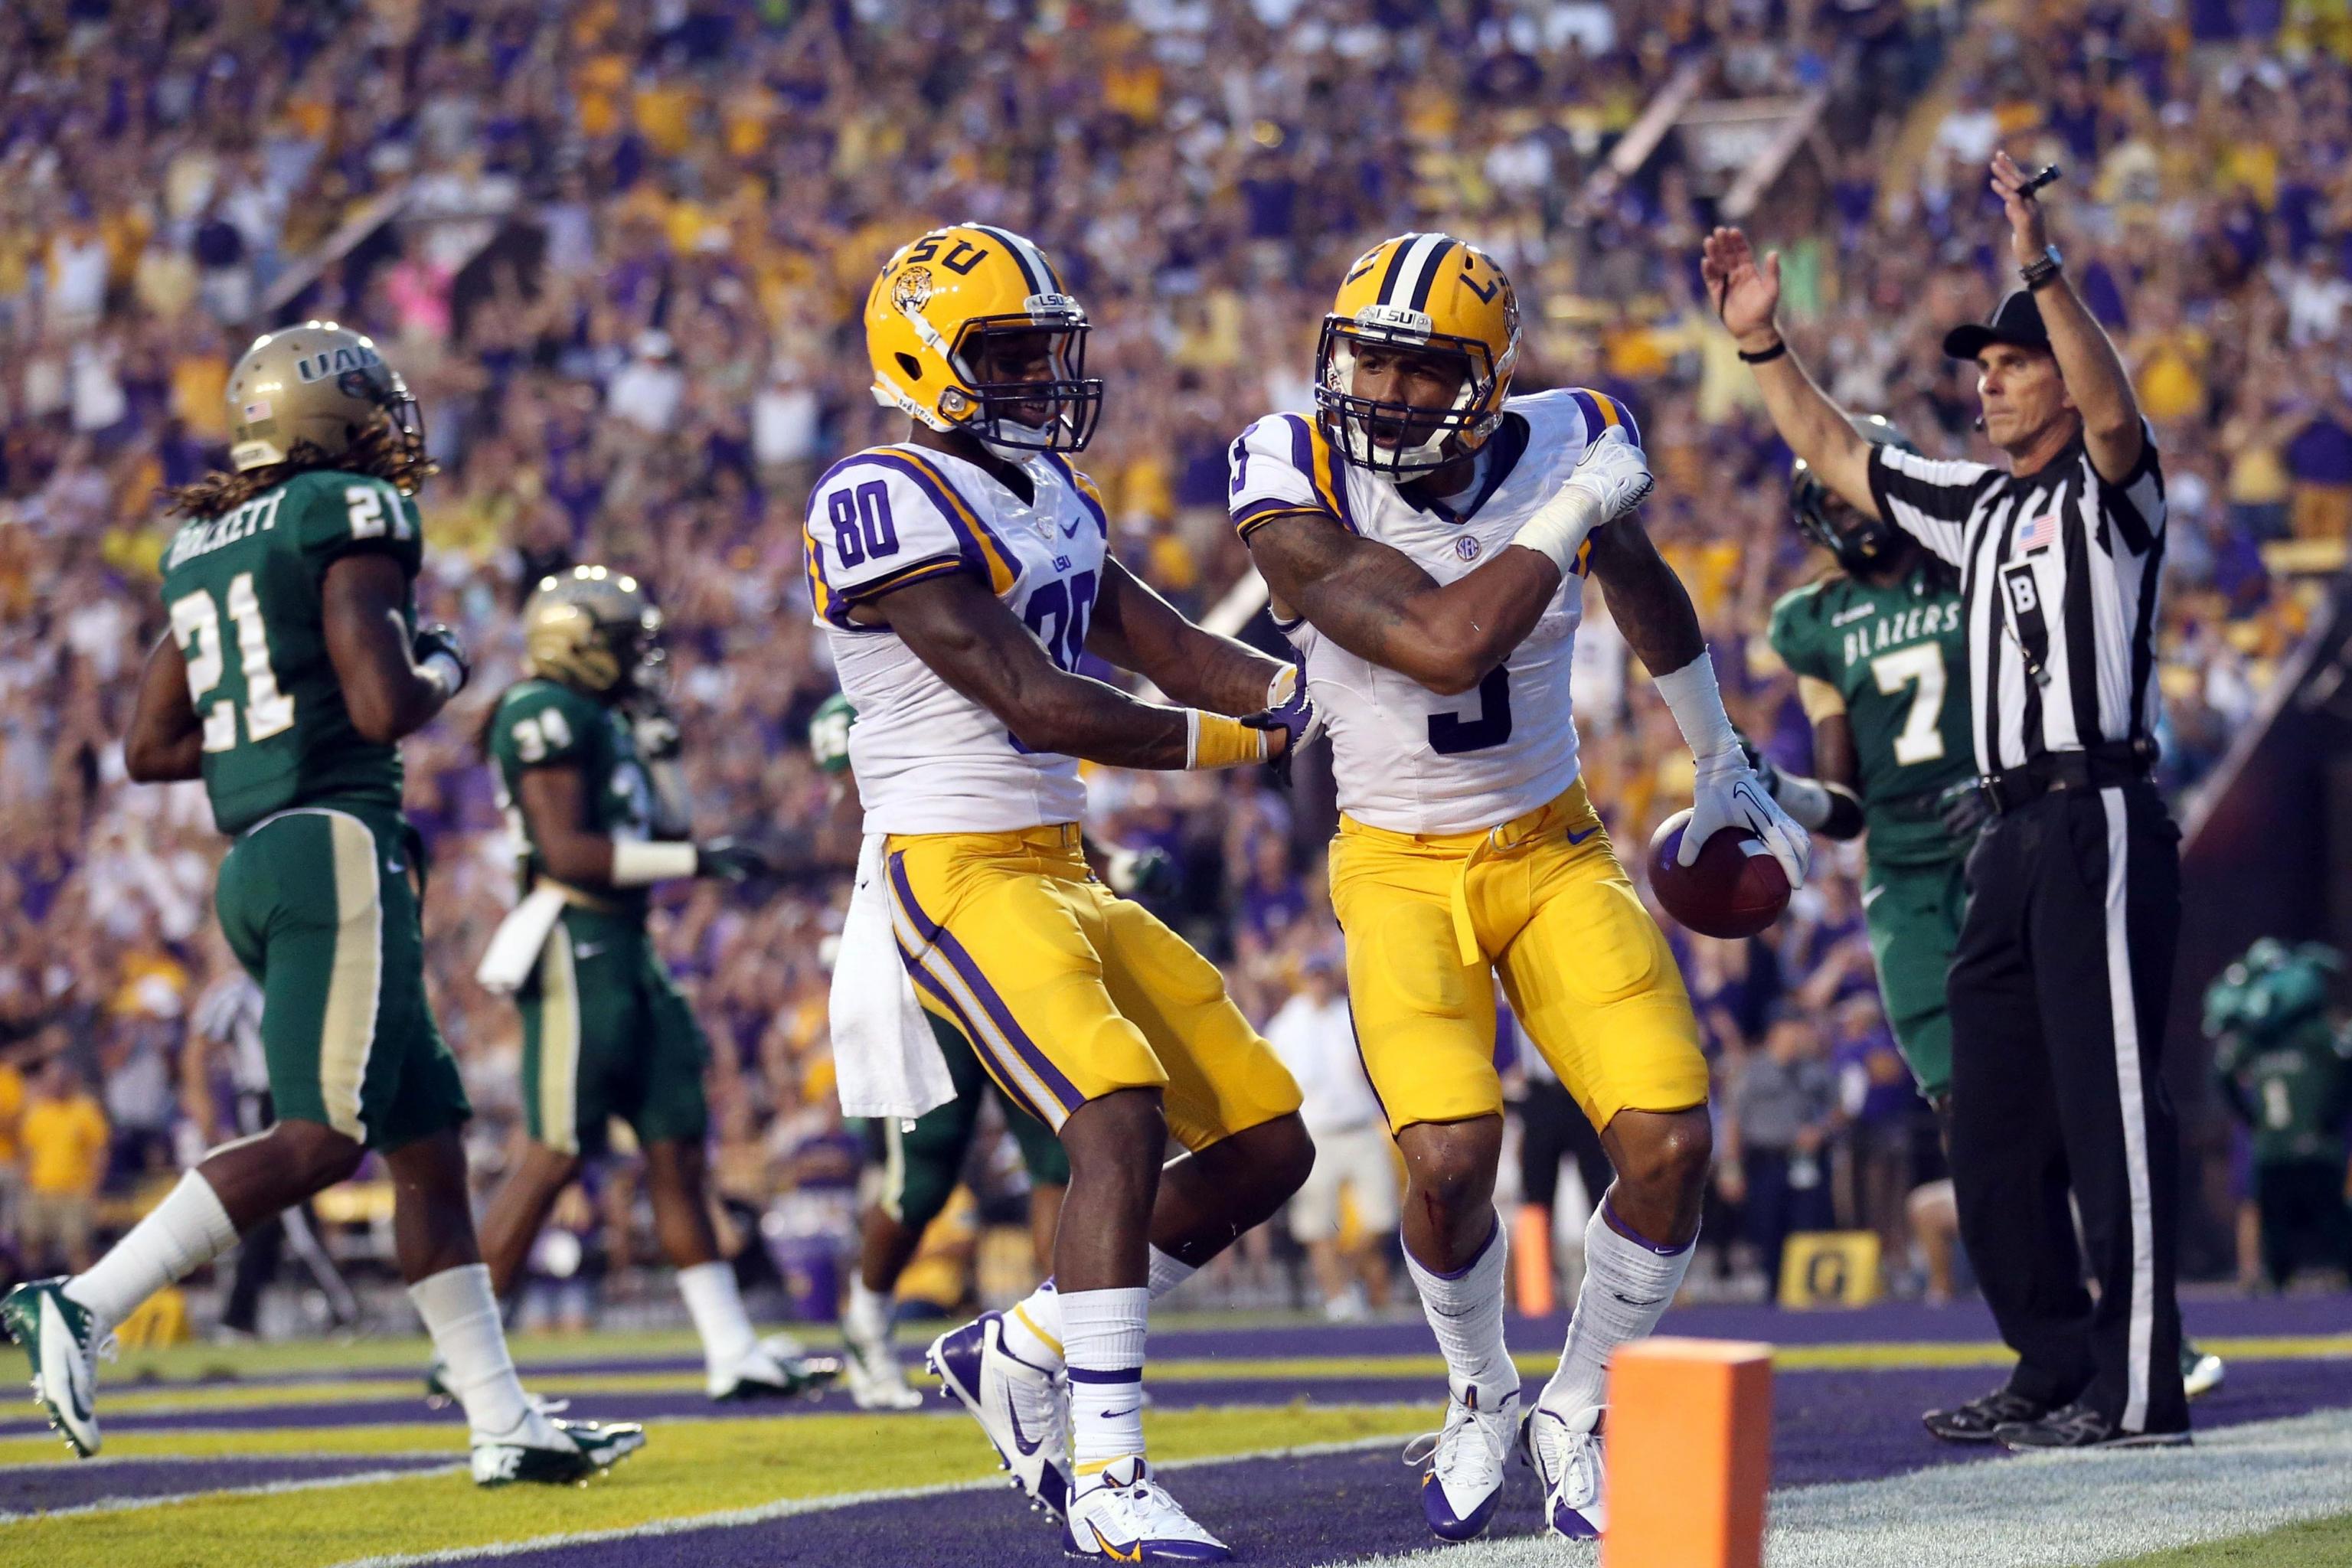 LSU receivers Jarvis Landry and Odell Beckham Jr. have special